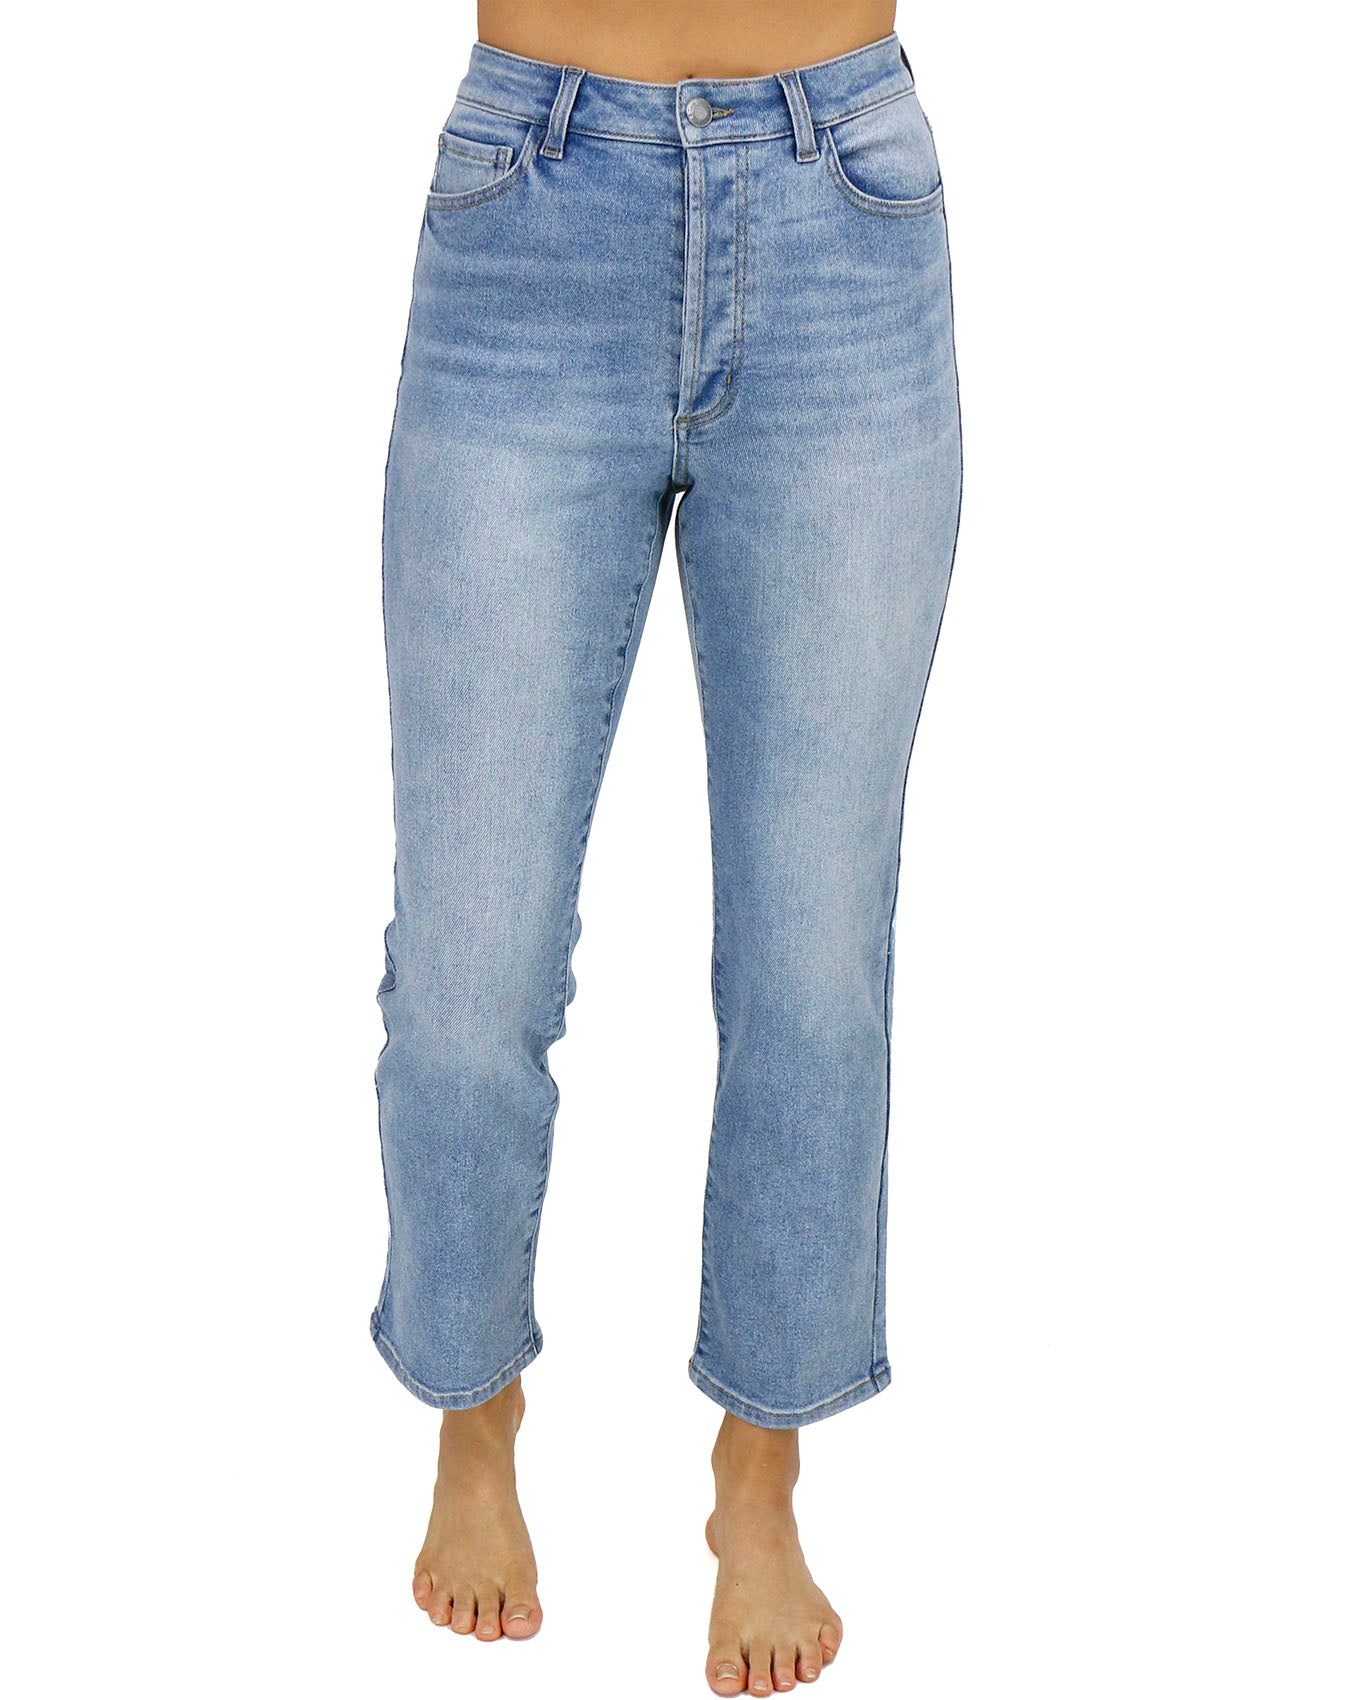 front view stock shot of premium high waisted mom jeans in non distressed mid-wash